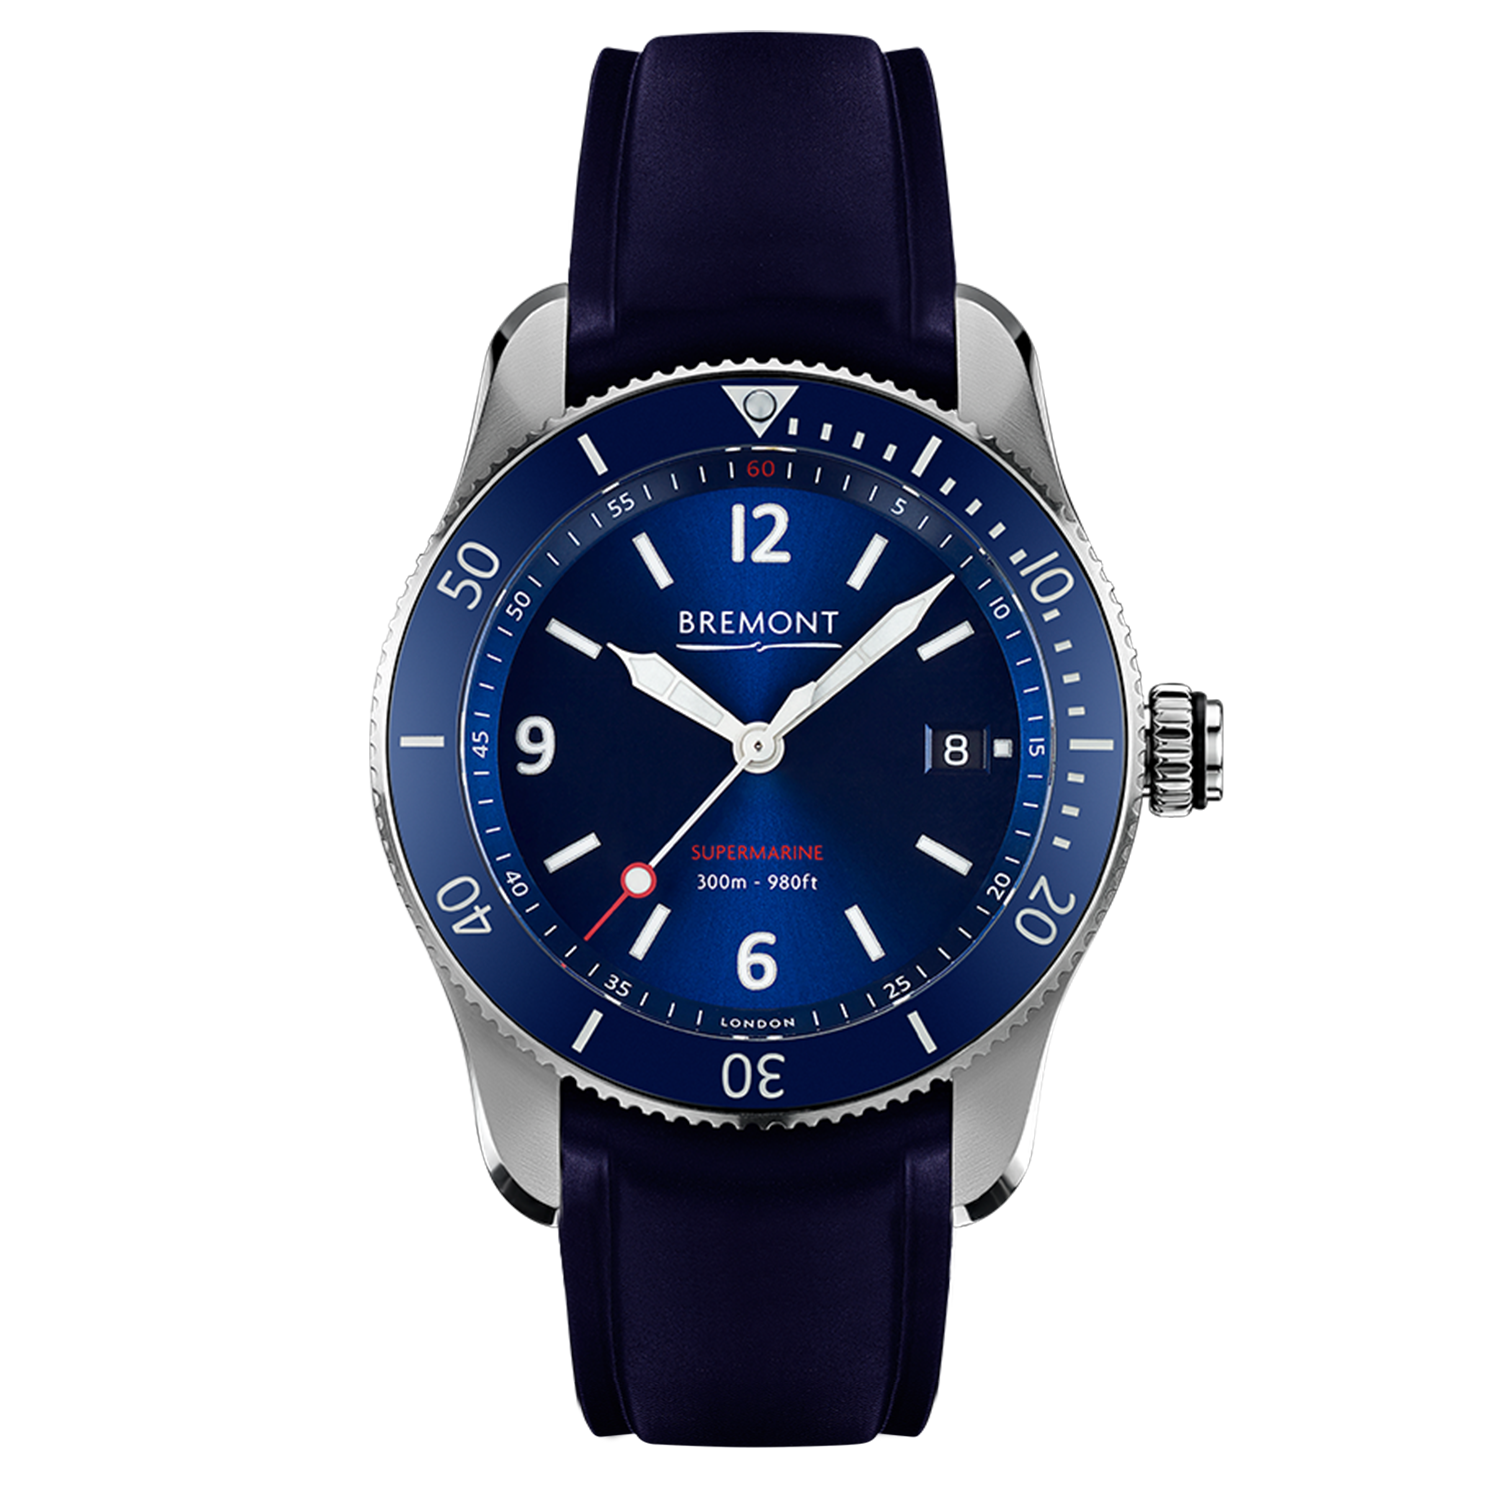 Bremong Supermarine S300 Diving Watch